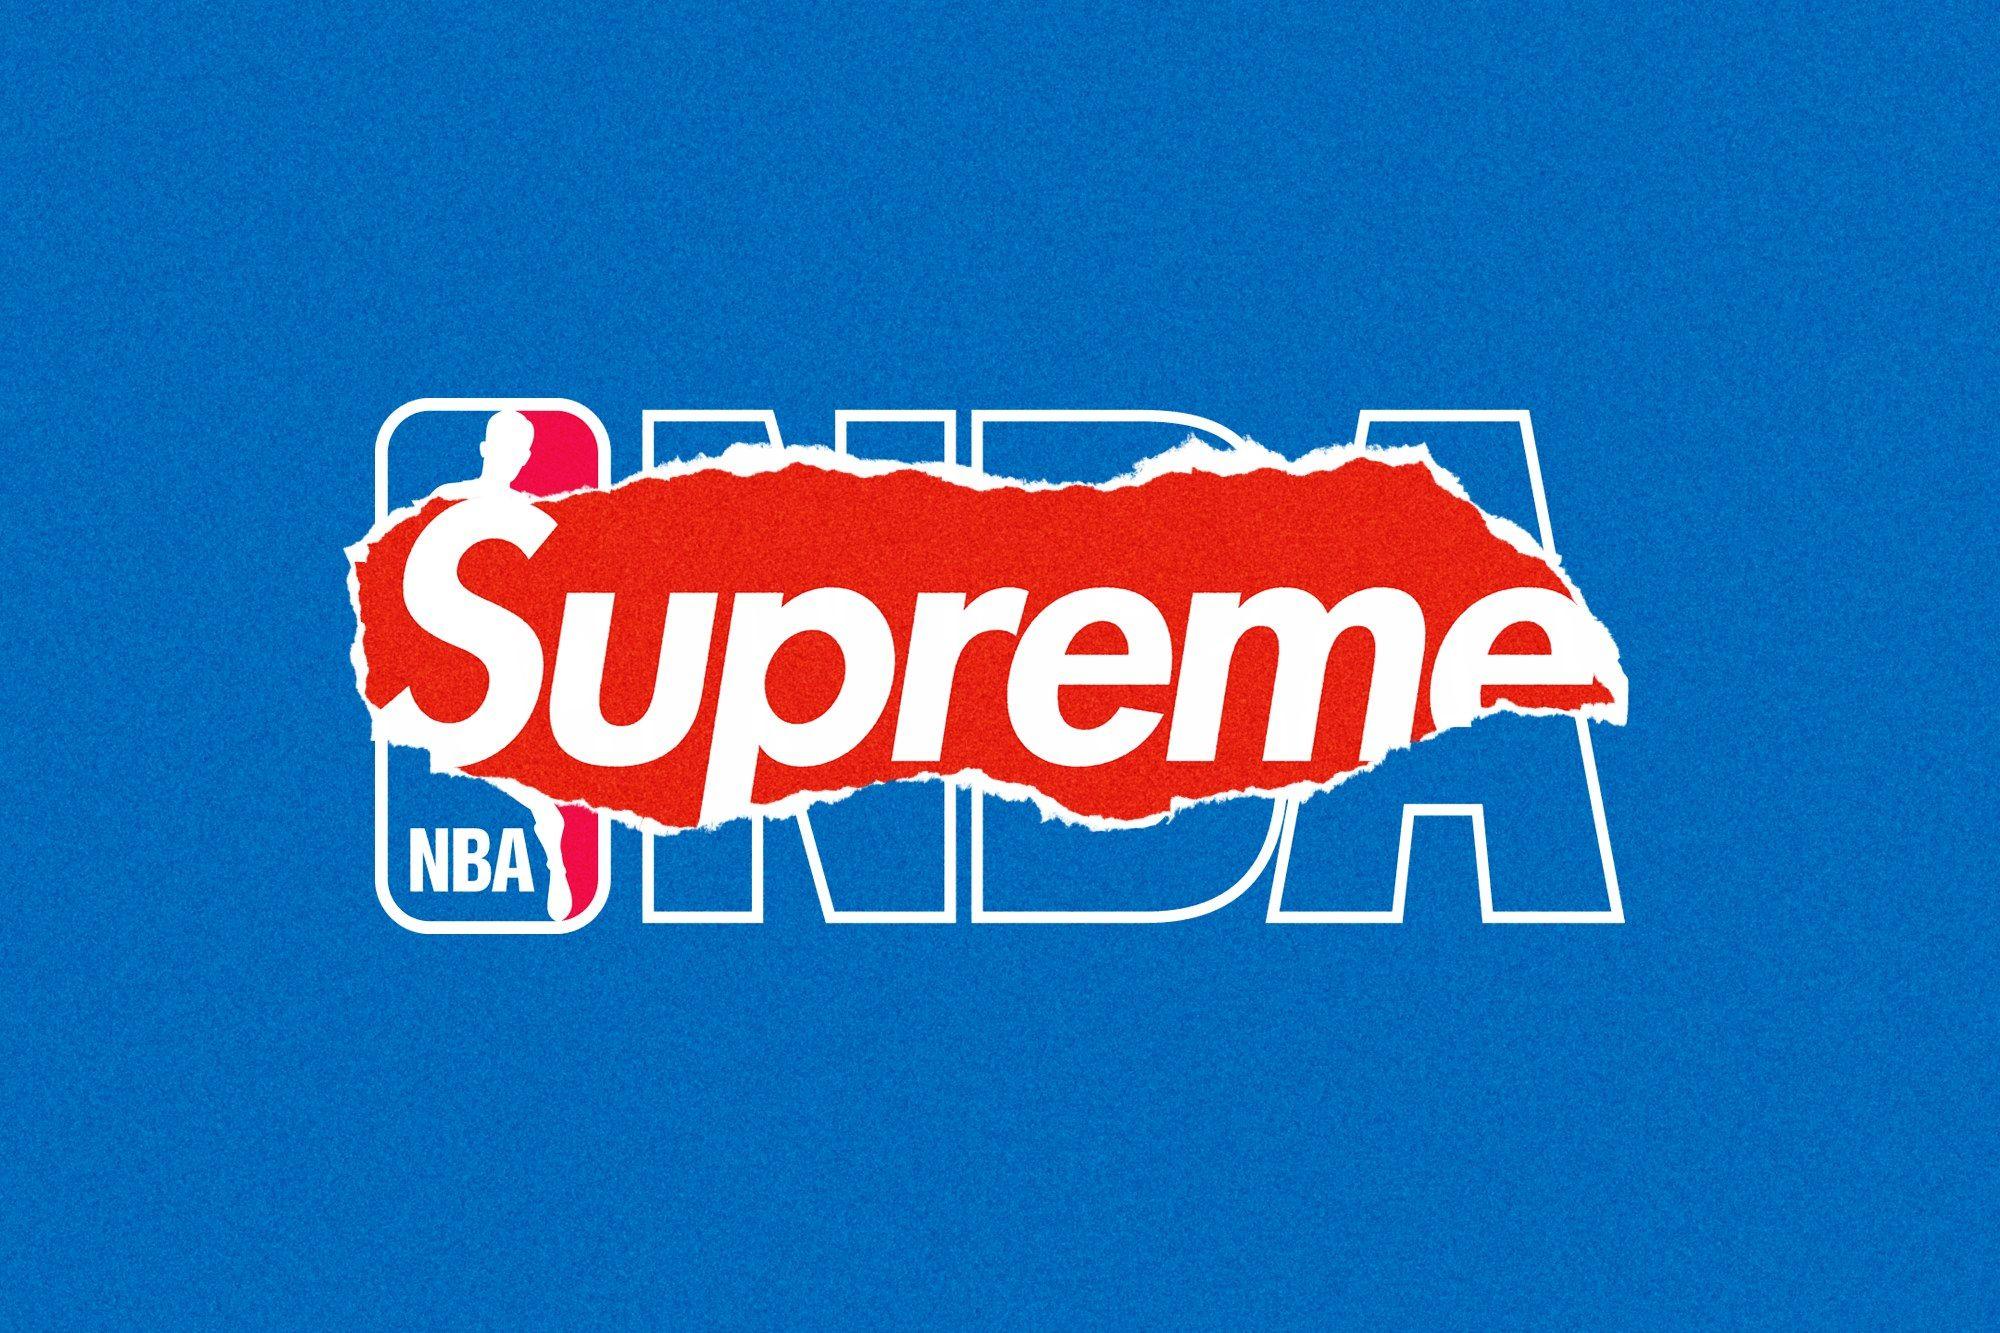 Supreme Logo - NBA Tells J.R. Smith to Cover Up His Supreme Tattoo Or Else